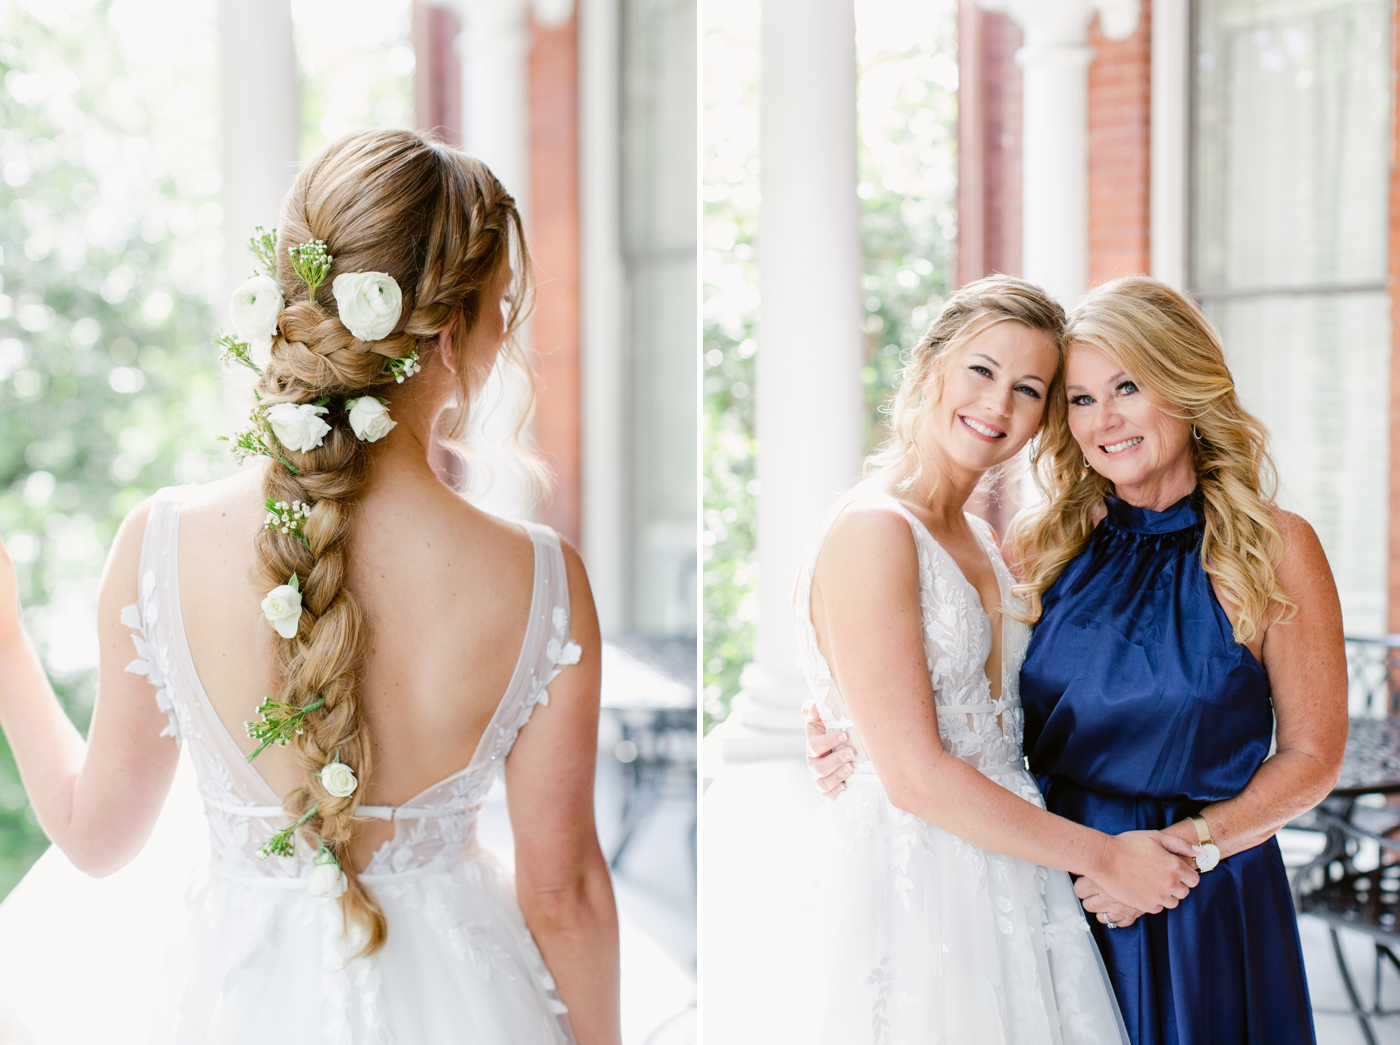 Bride with a soft braid and fresh flowers in her hair